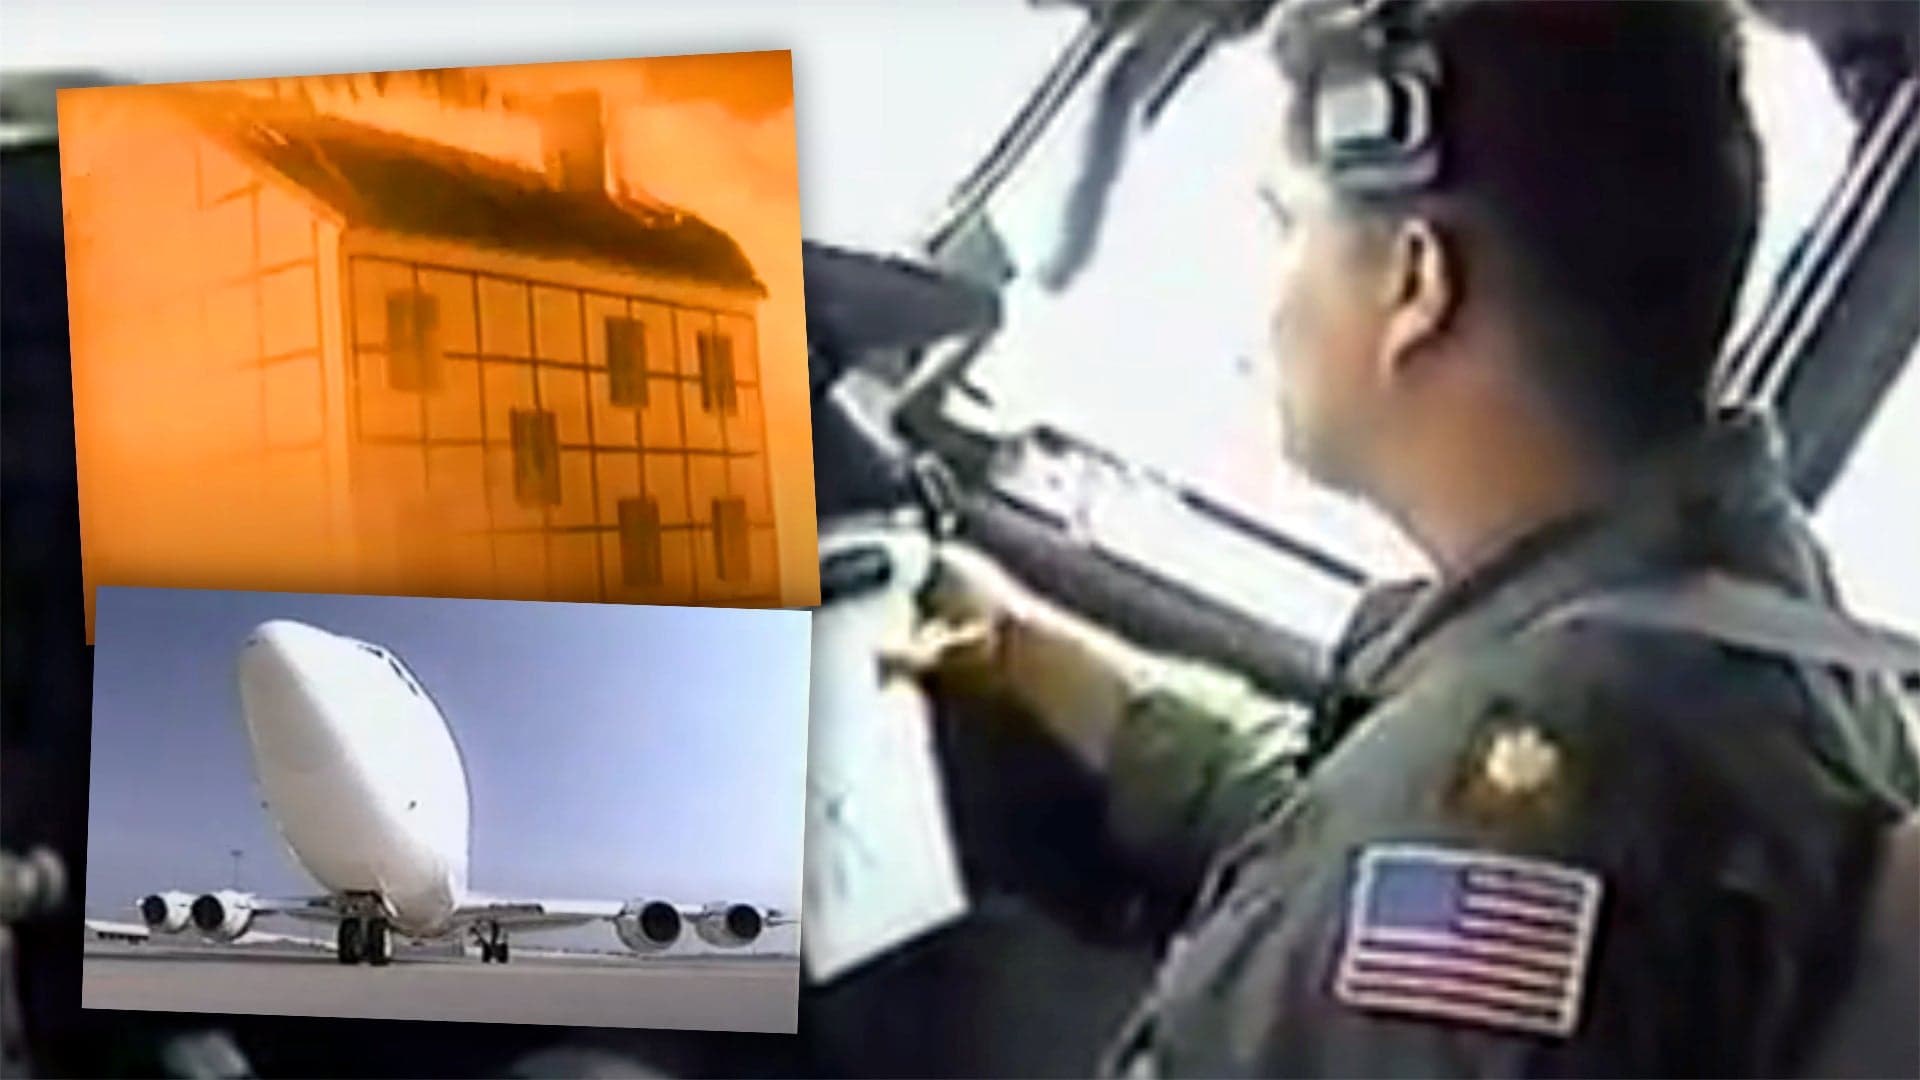 Doomsday Plane Crews Made This Darkly Humorous Music Video Aptly Set To “Burning Down The House”